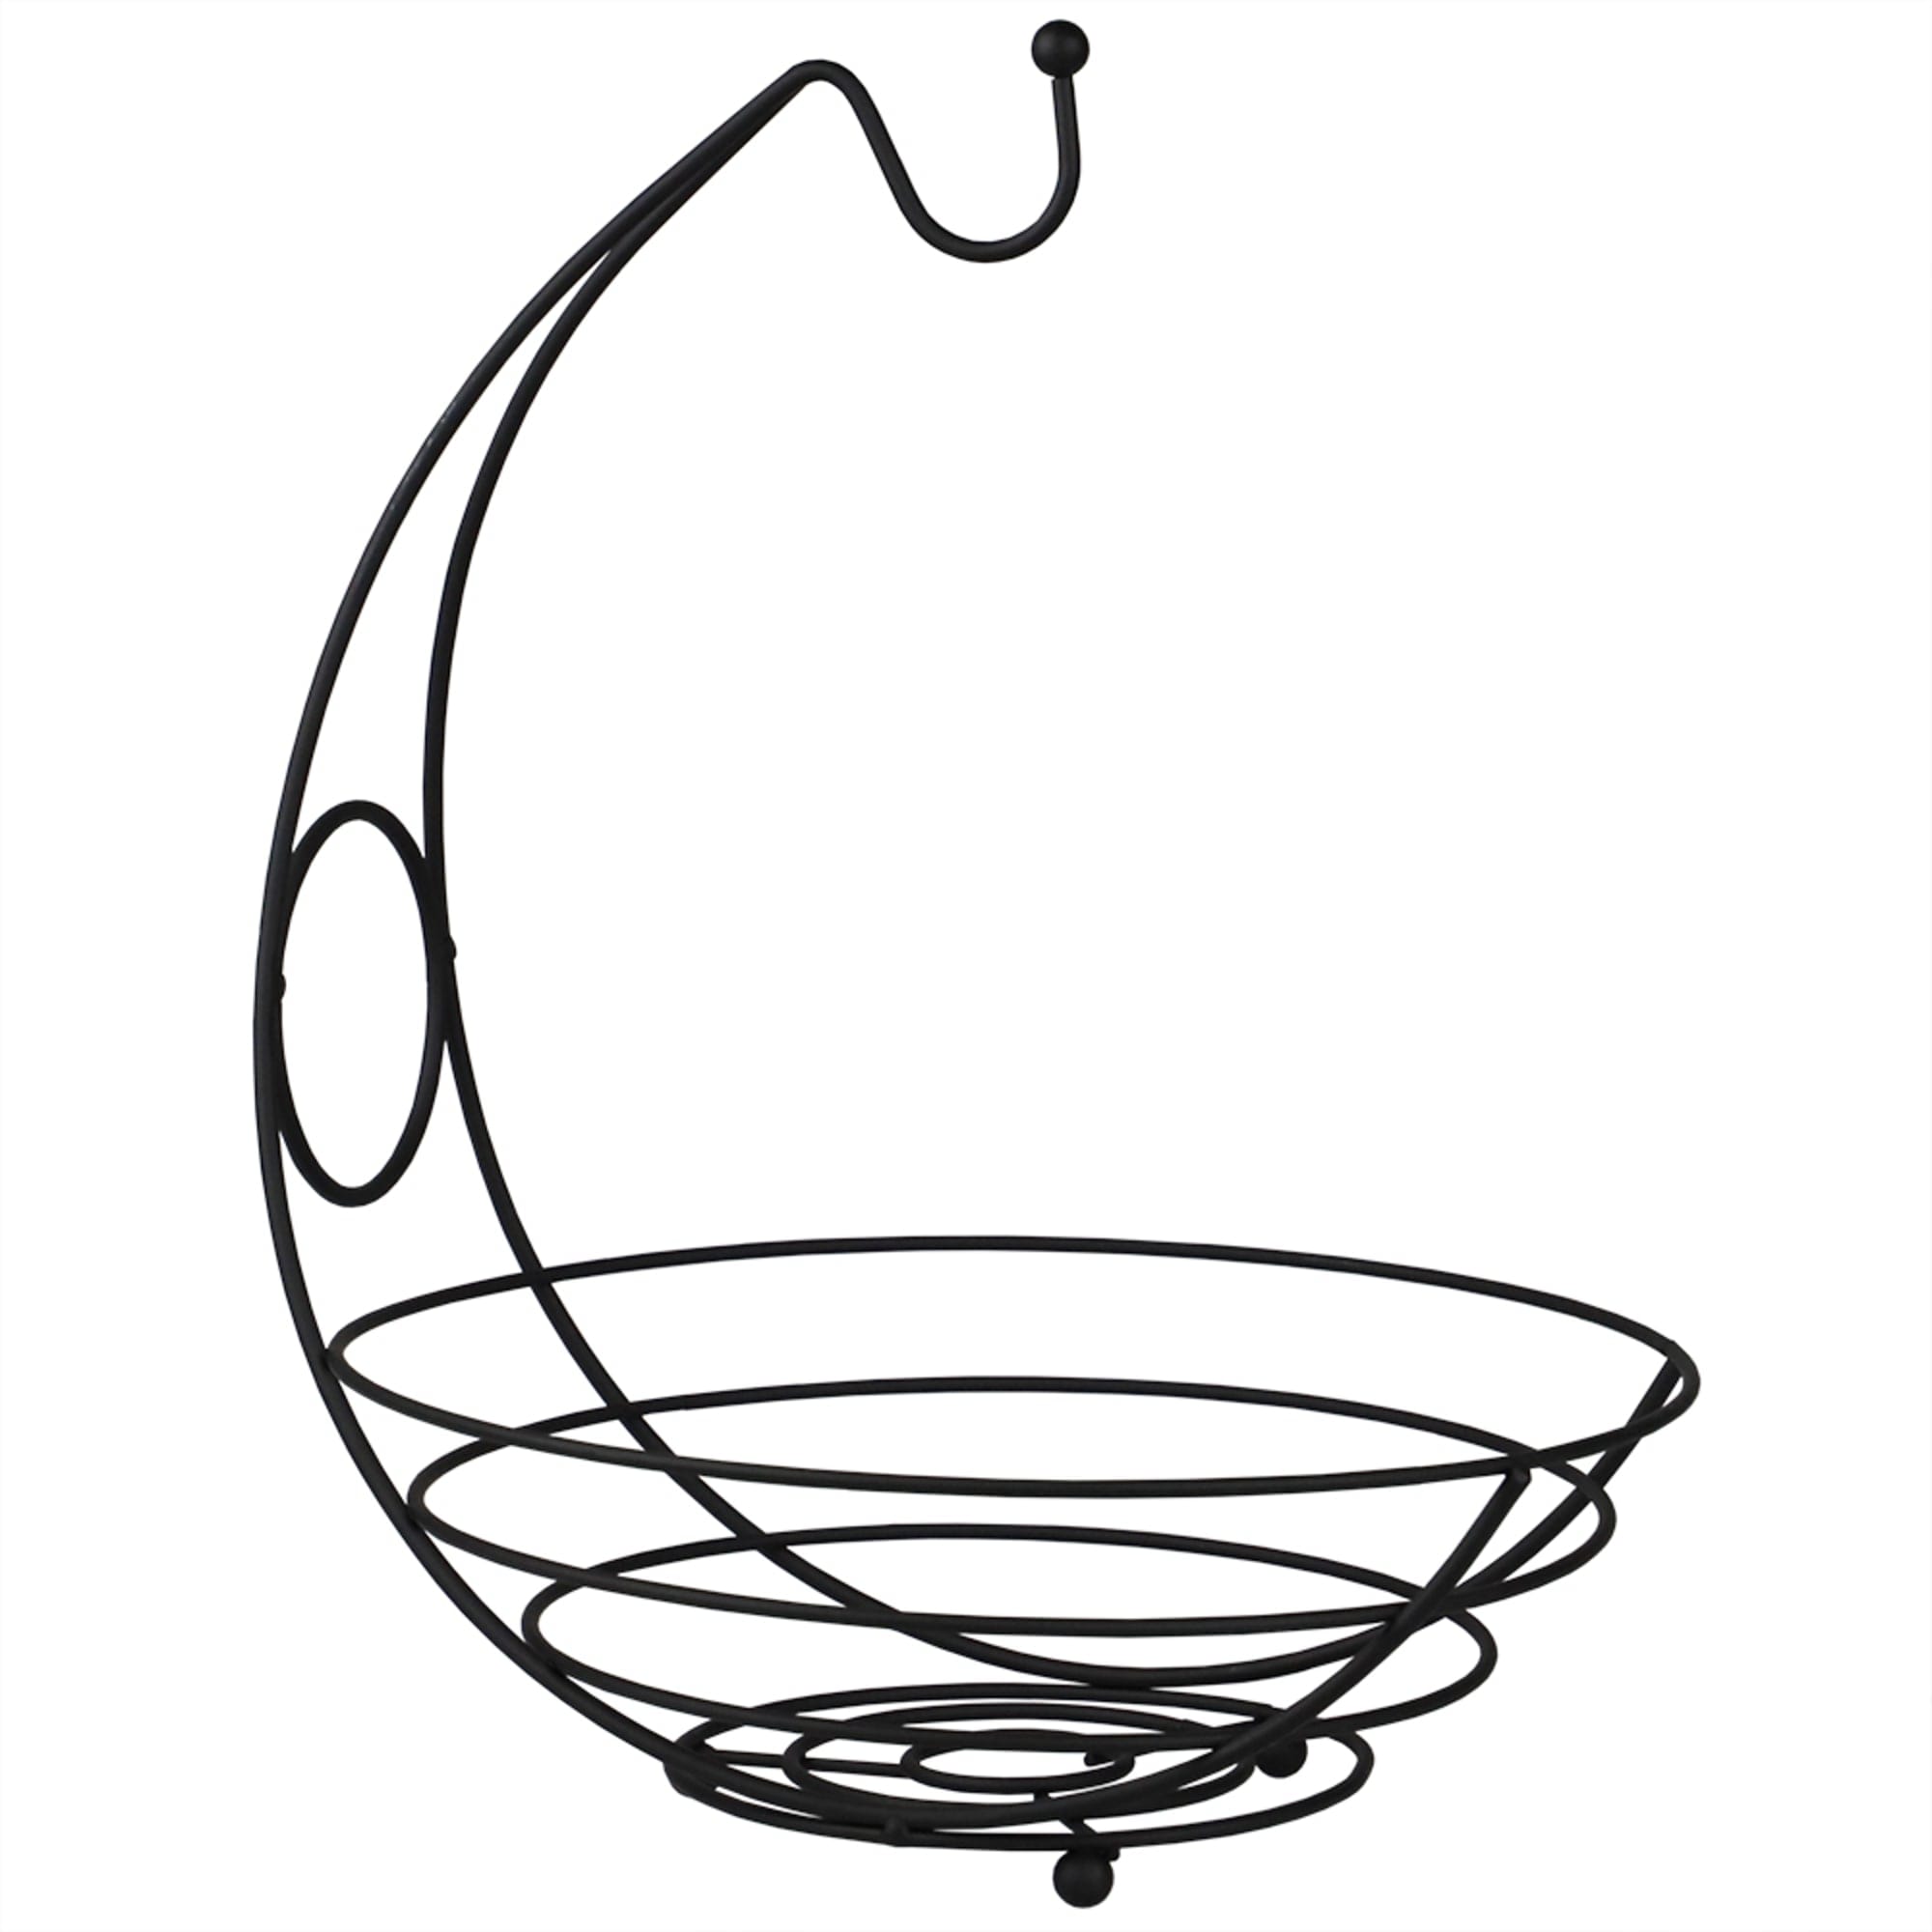 Home Basics Wire Collection Fruit Bowl with Banana Tree, Black $6.00 EACH, CASE PACK OF 12